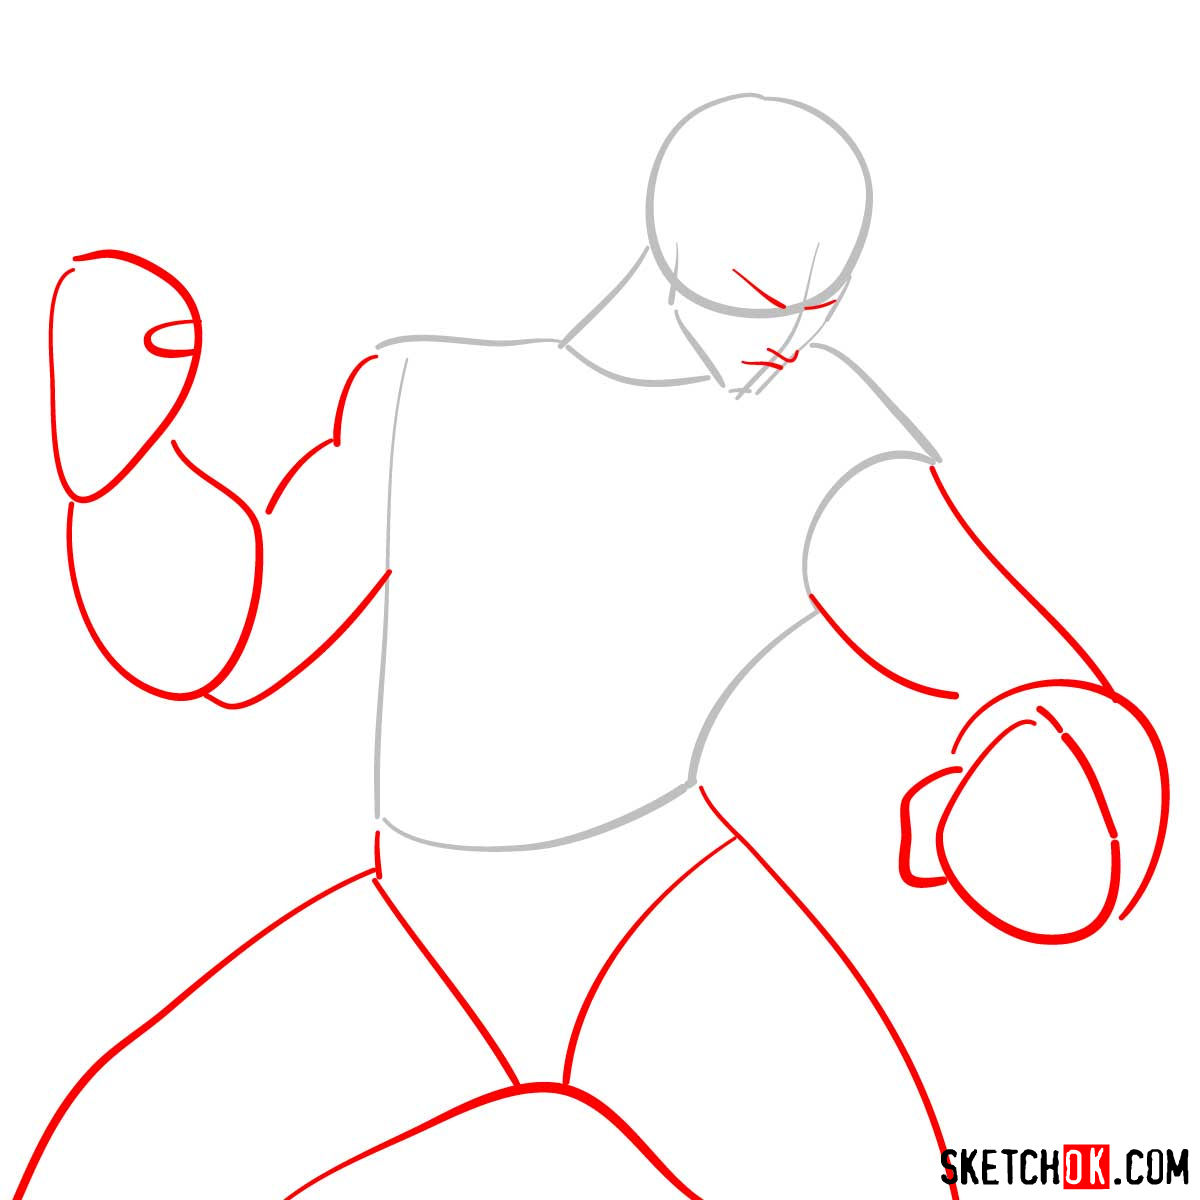 How to draw fighting Saitama in 12 steps - Sketchok easy drawing guides